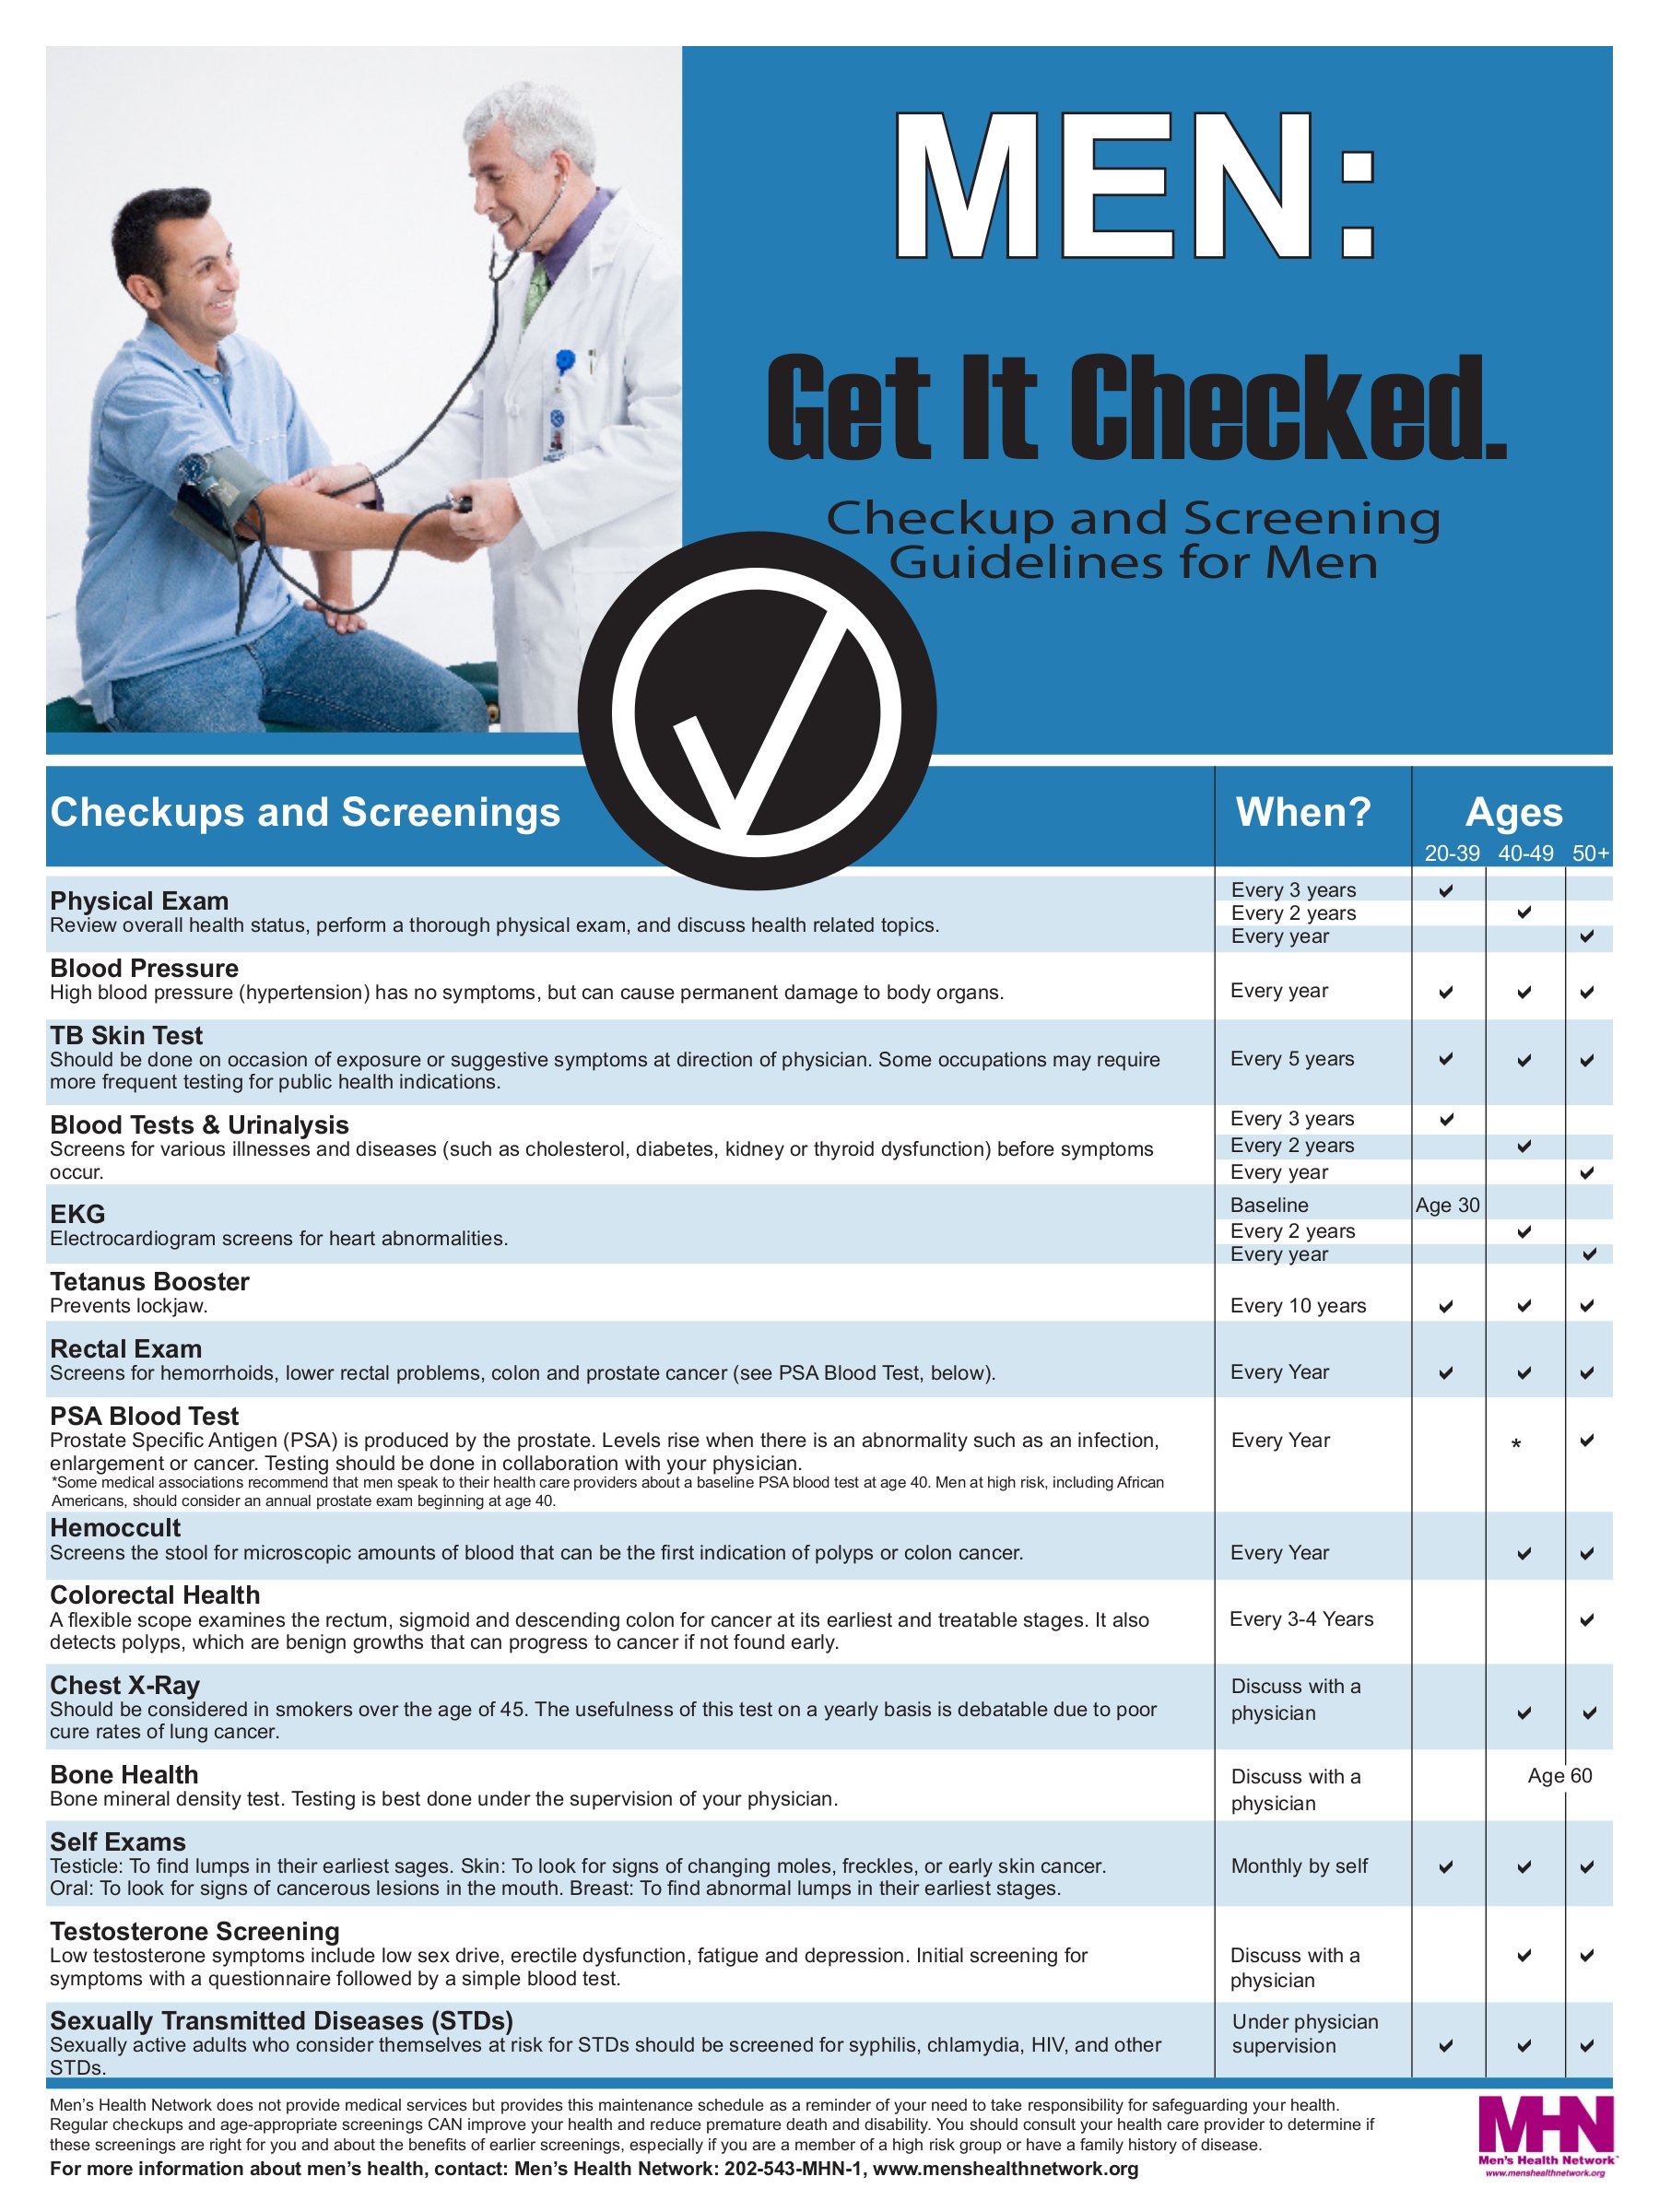 Bison Men: Get It Checked Checkup and Screening Guidelines for Men. Image credit: Men's Health Network